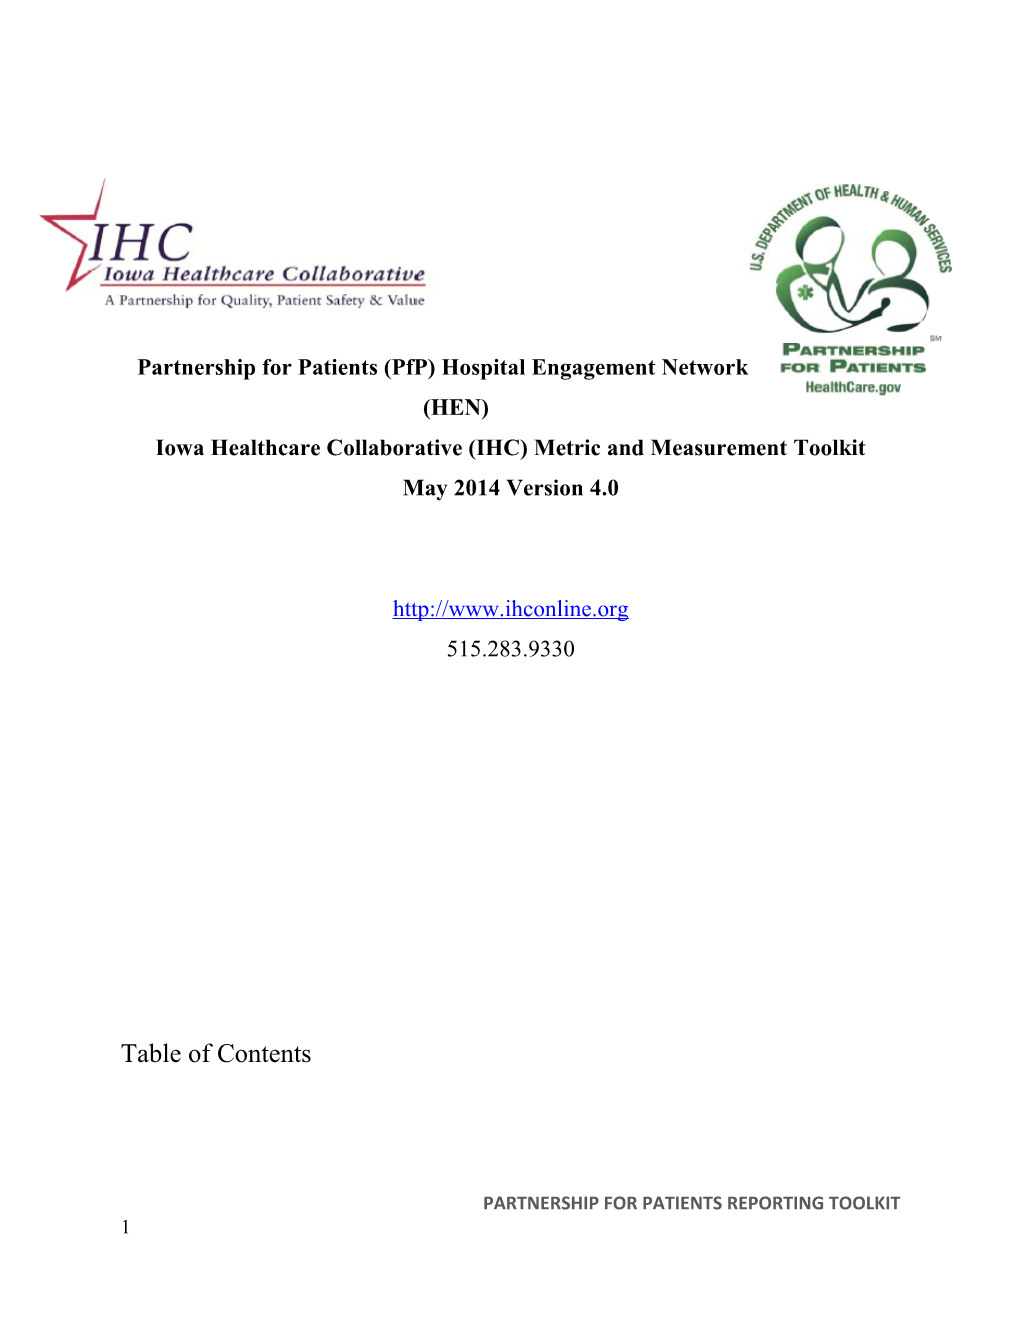 Partnership for Patients Reporting Toolkit